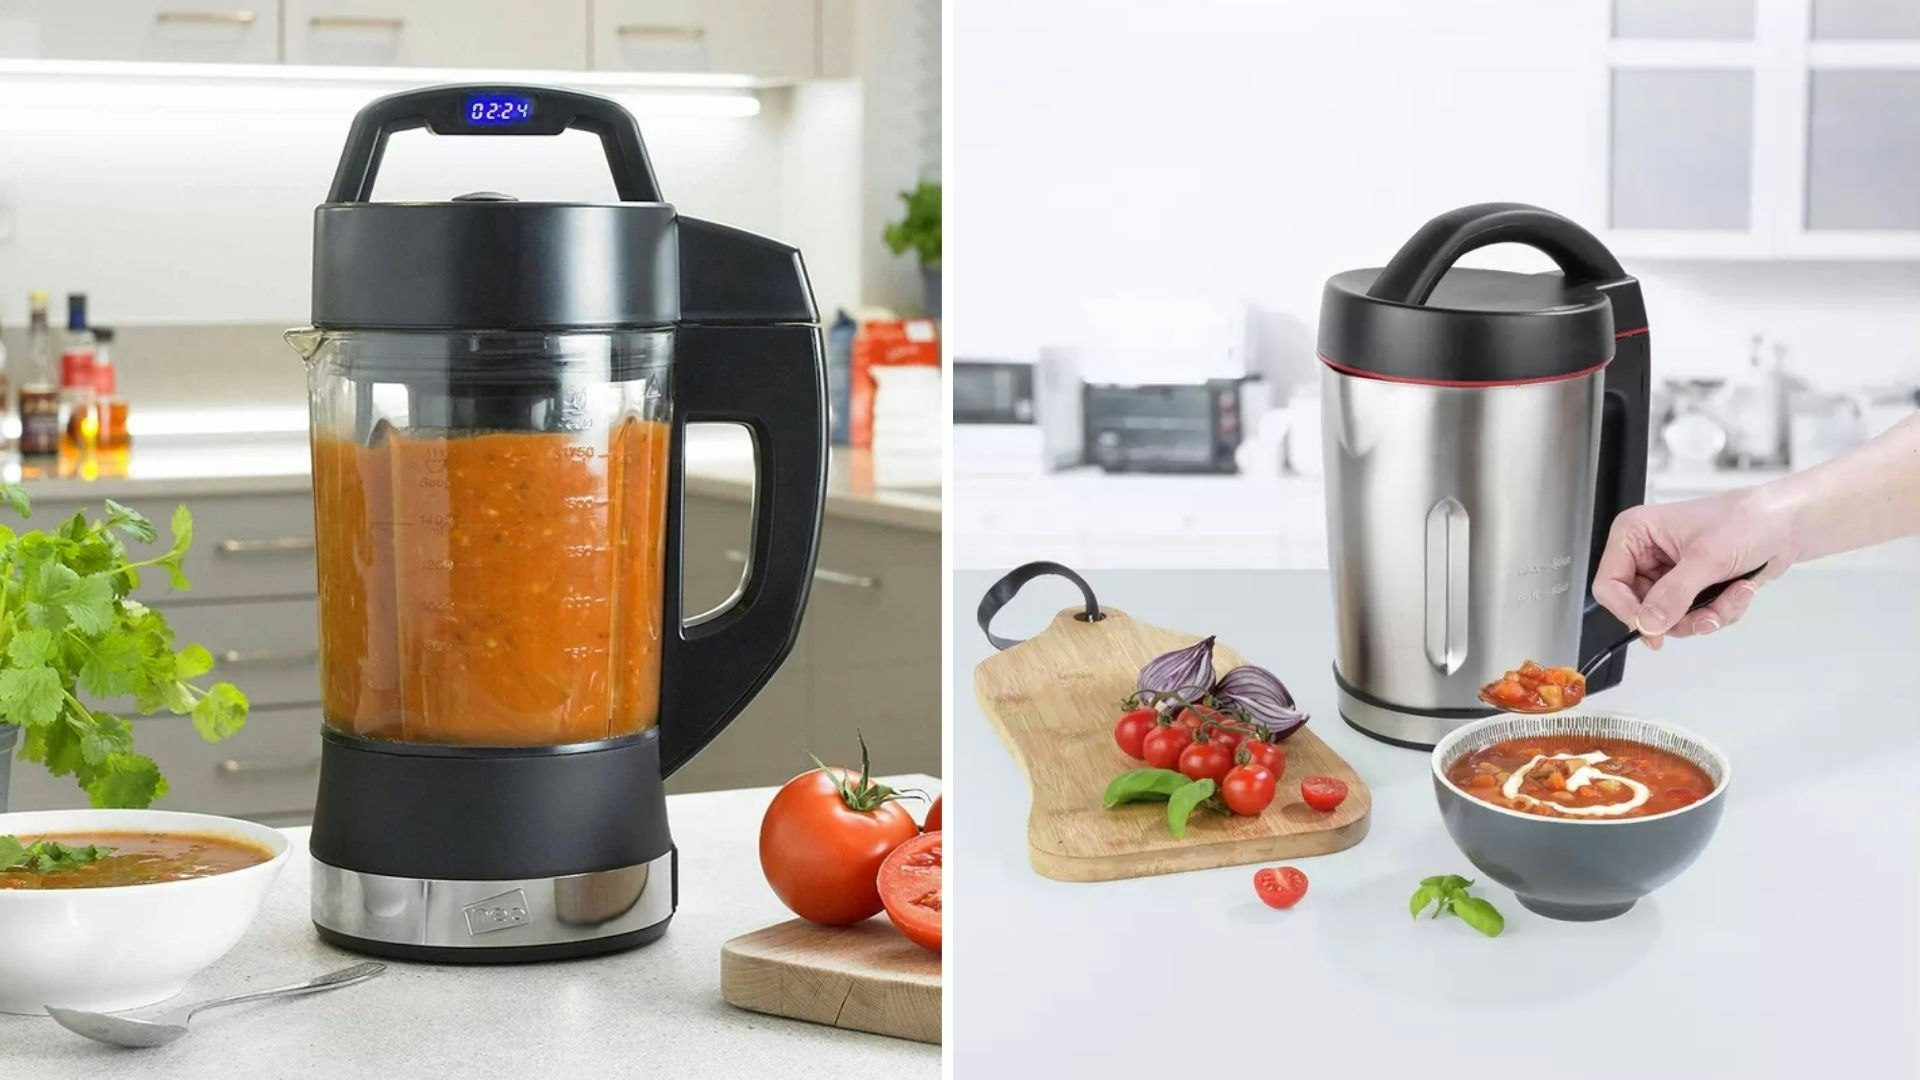 Morphy Richards Soup Maker Review - ET Speaks From Home